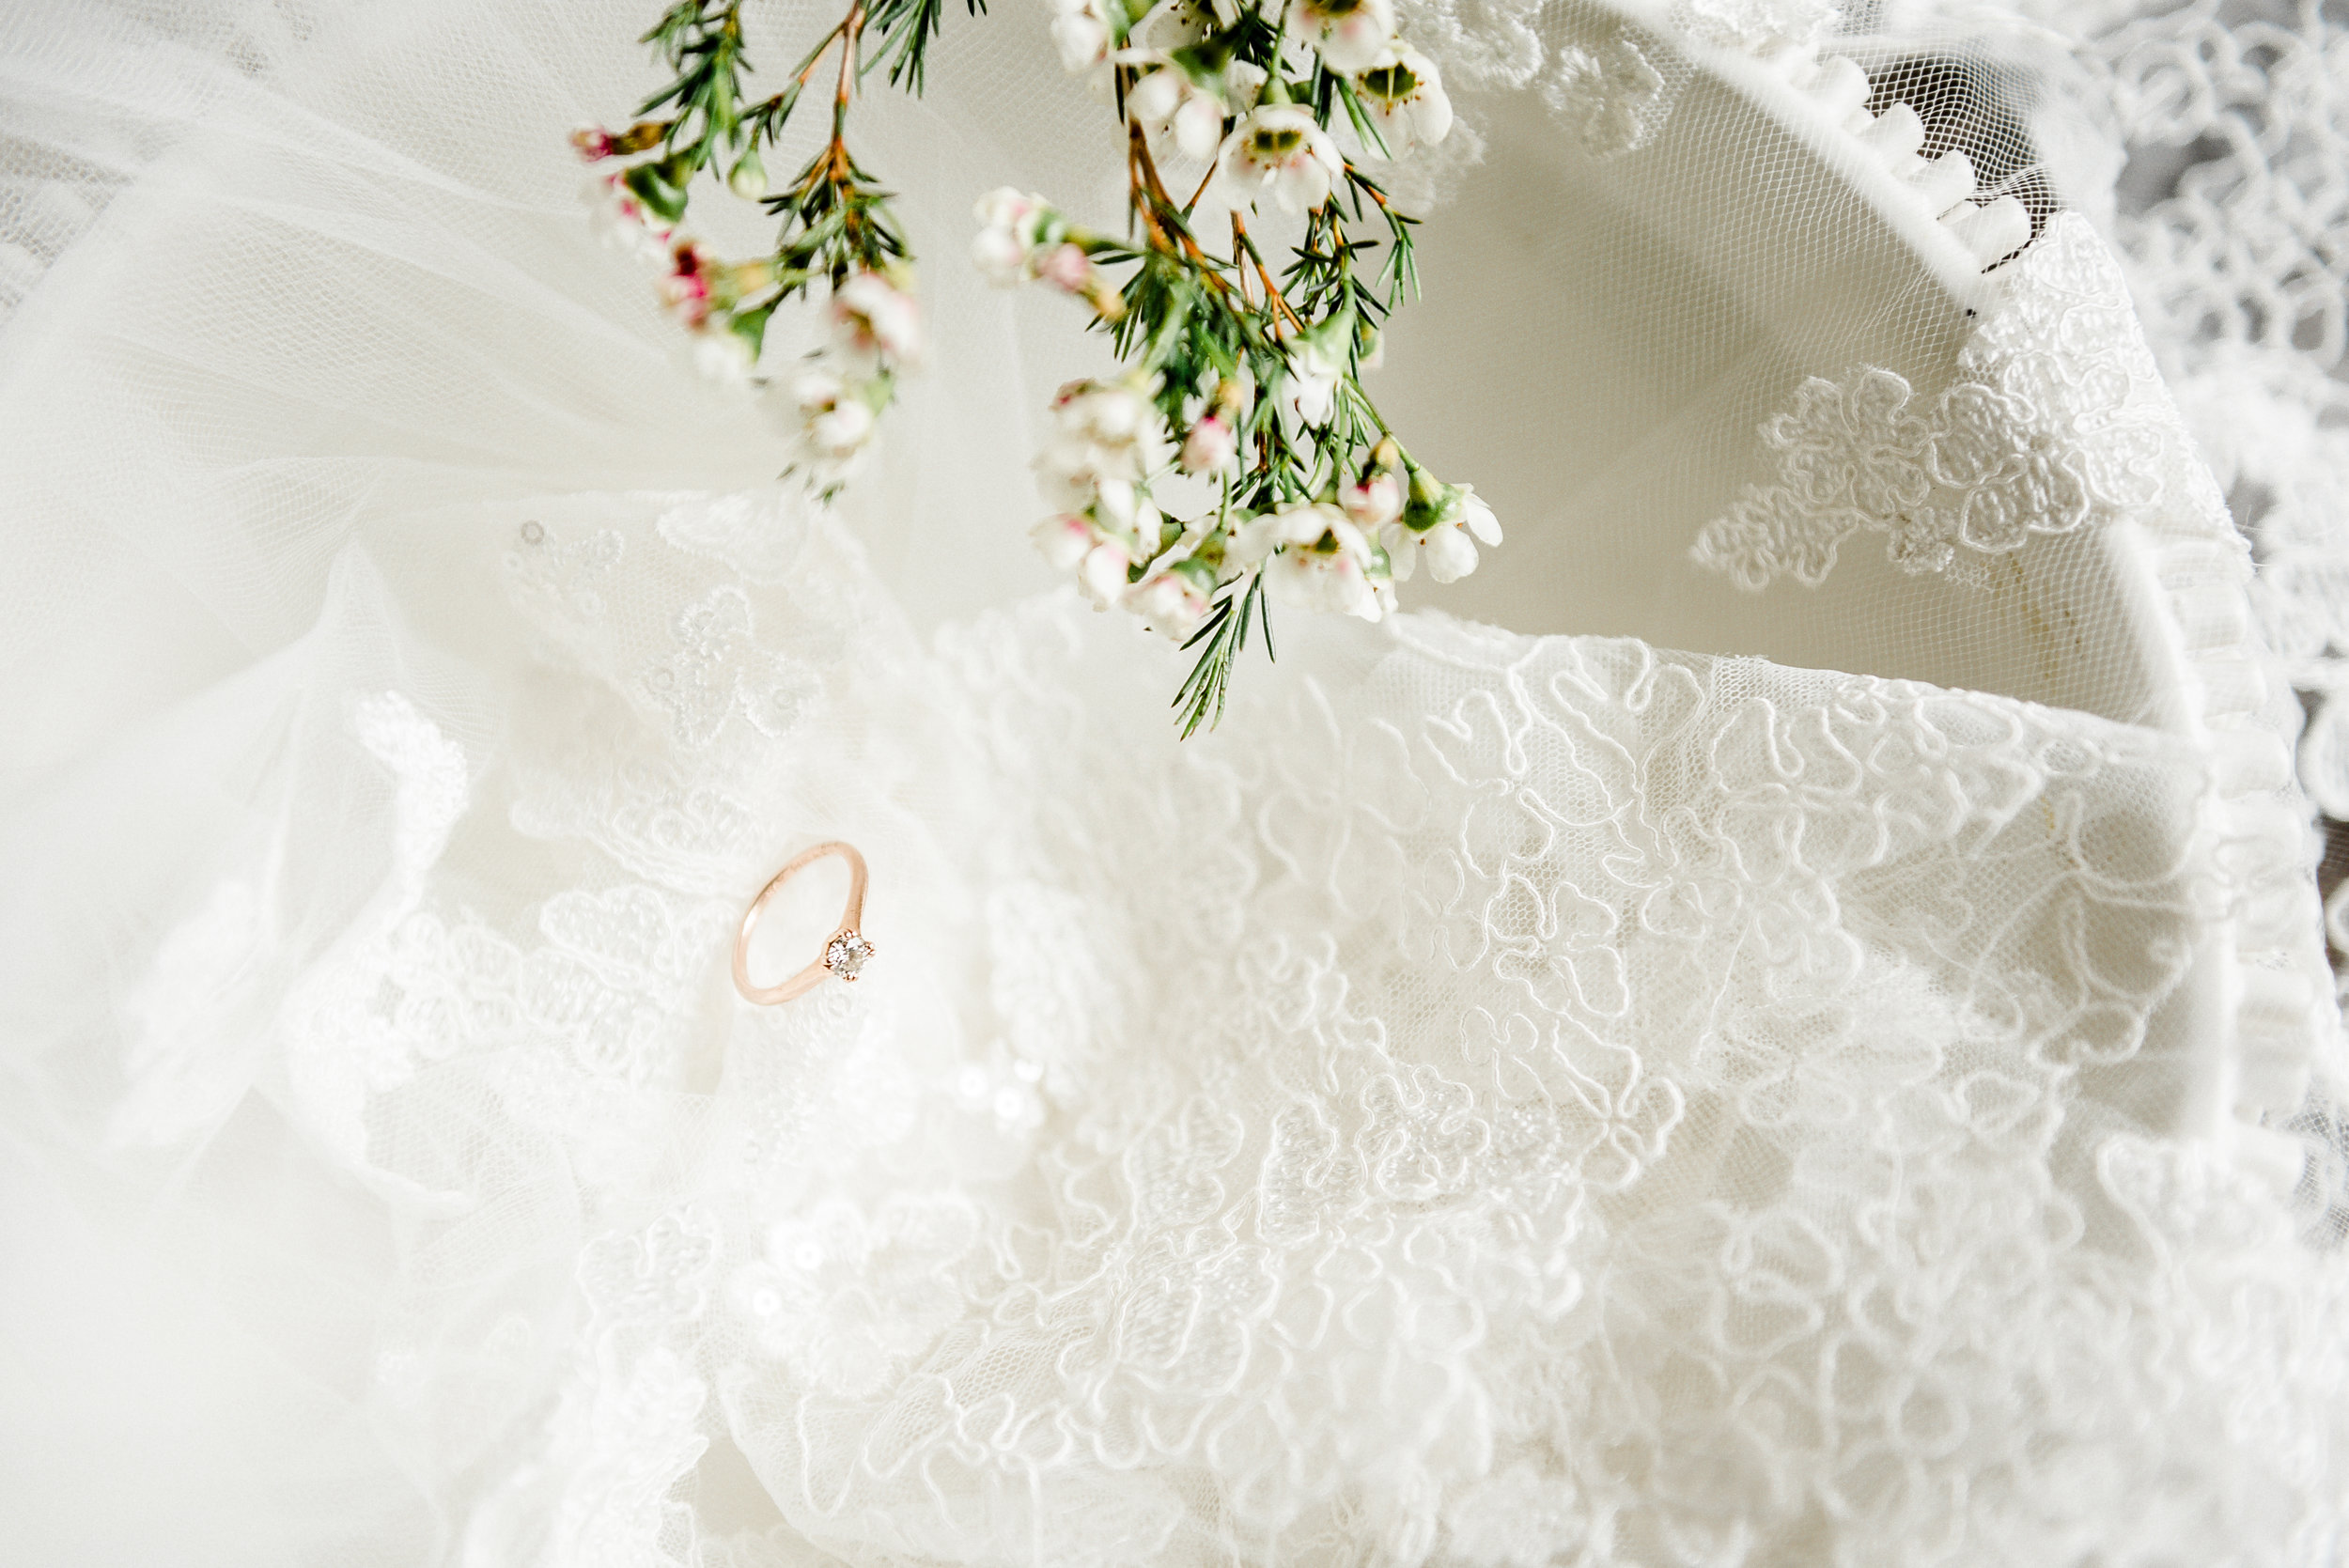 ring in white bowl with lace